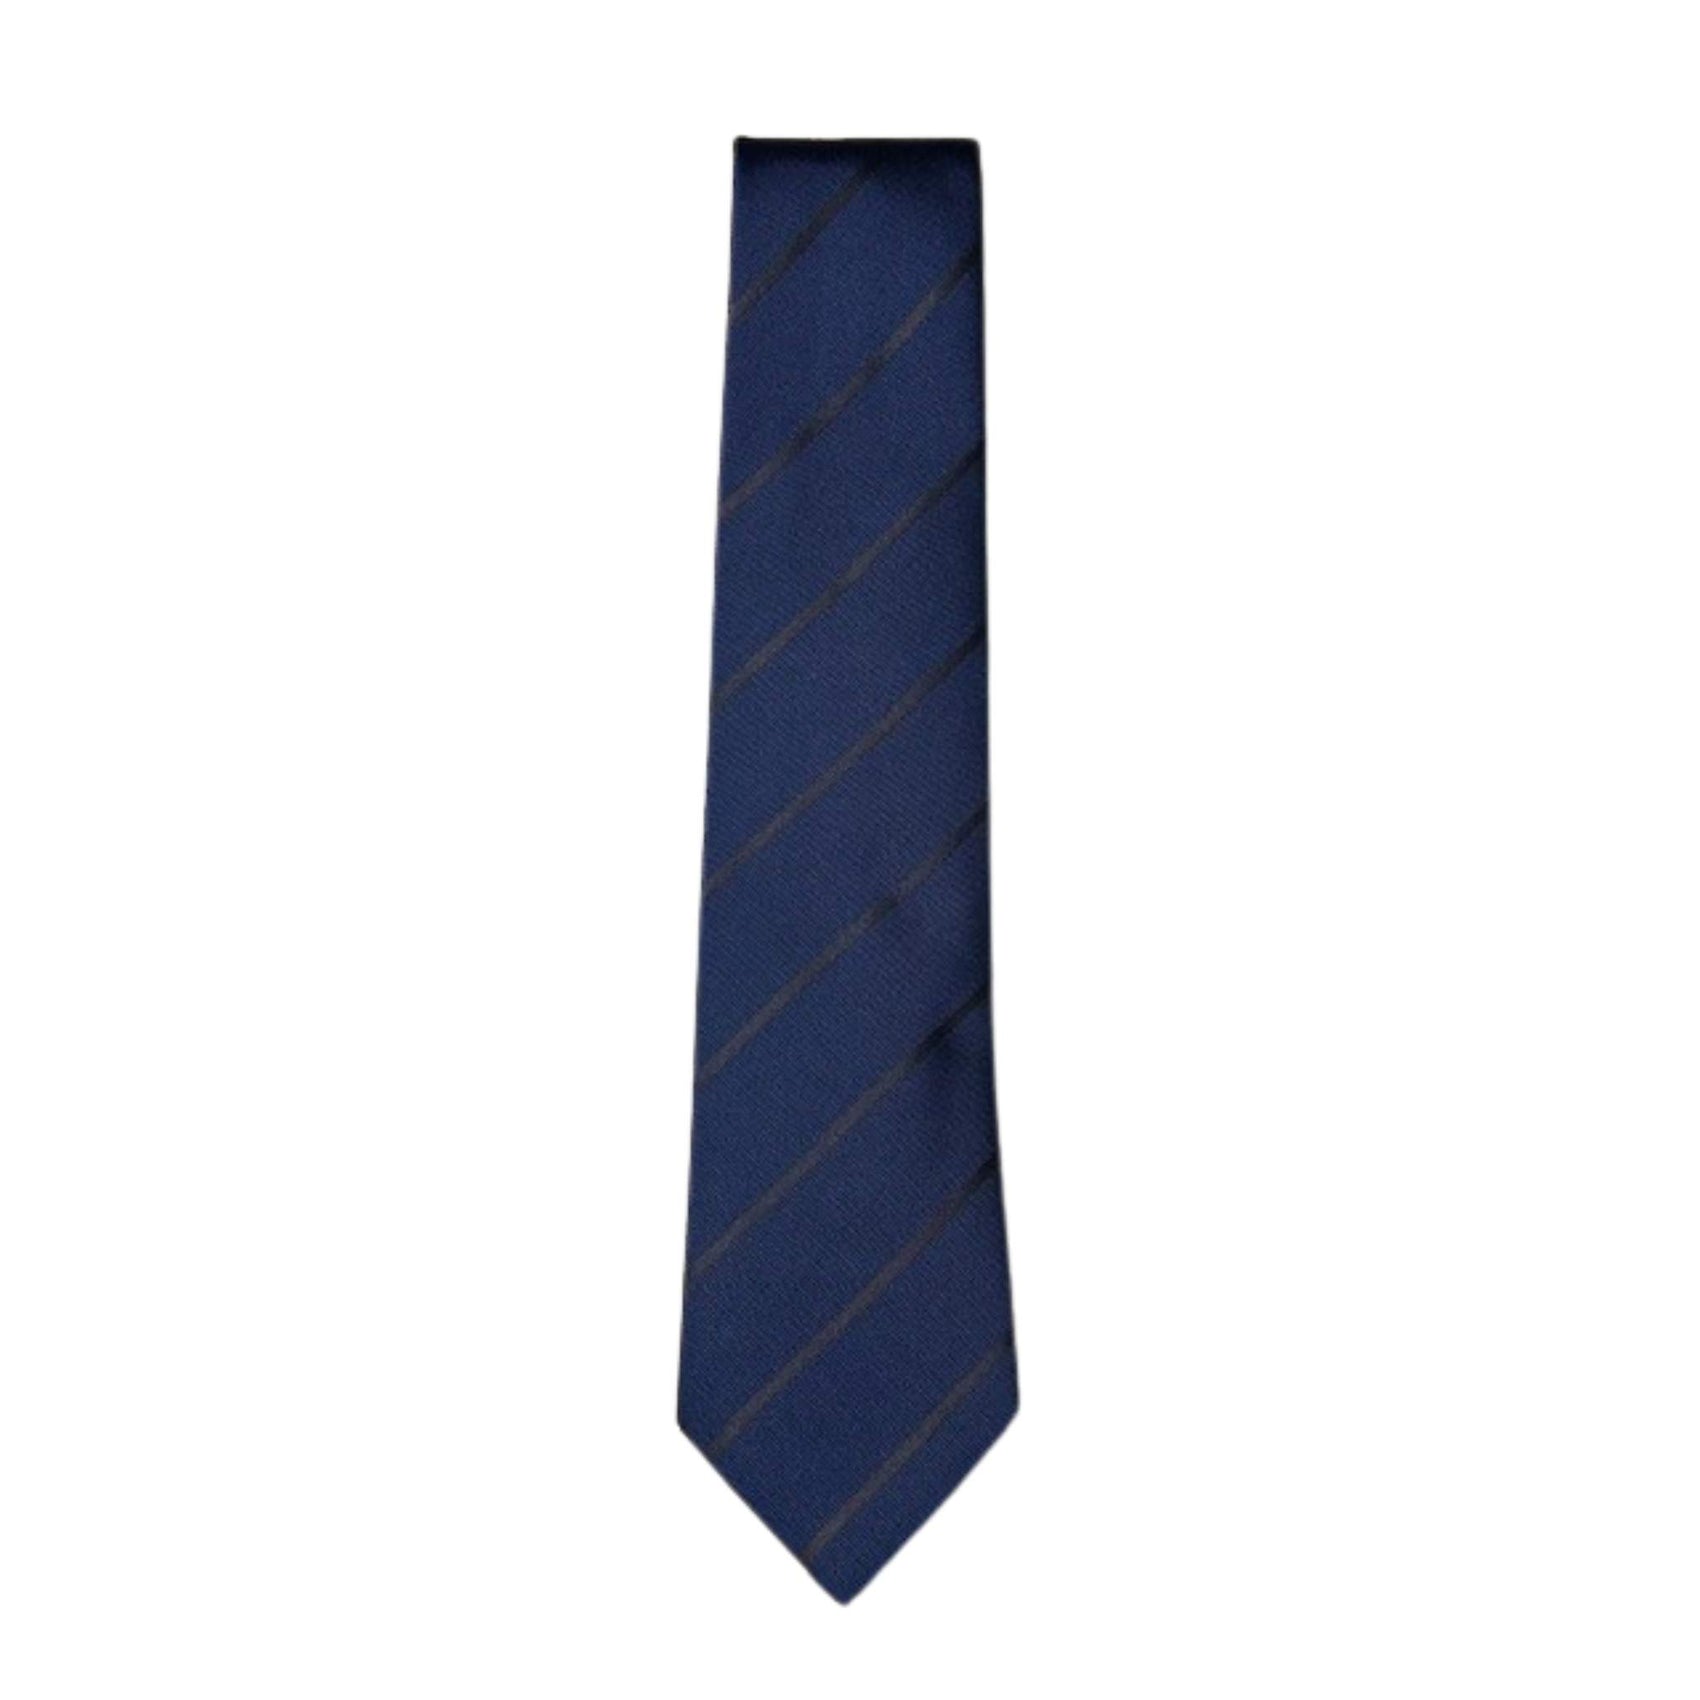 Navy and Brown stripe tie